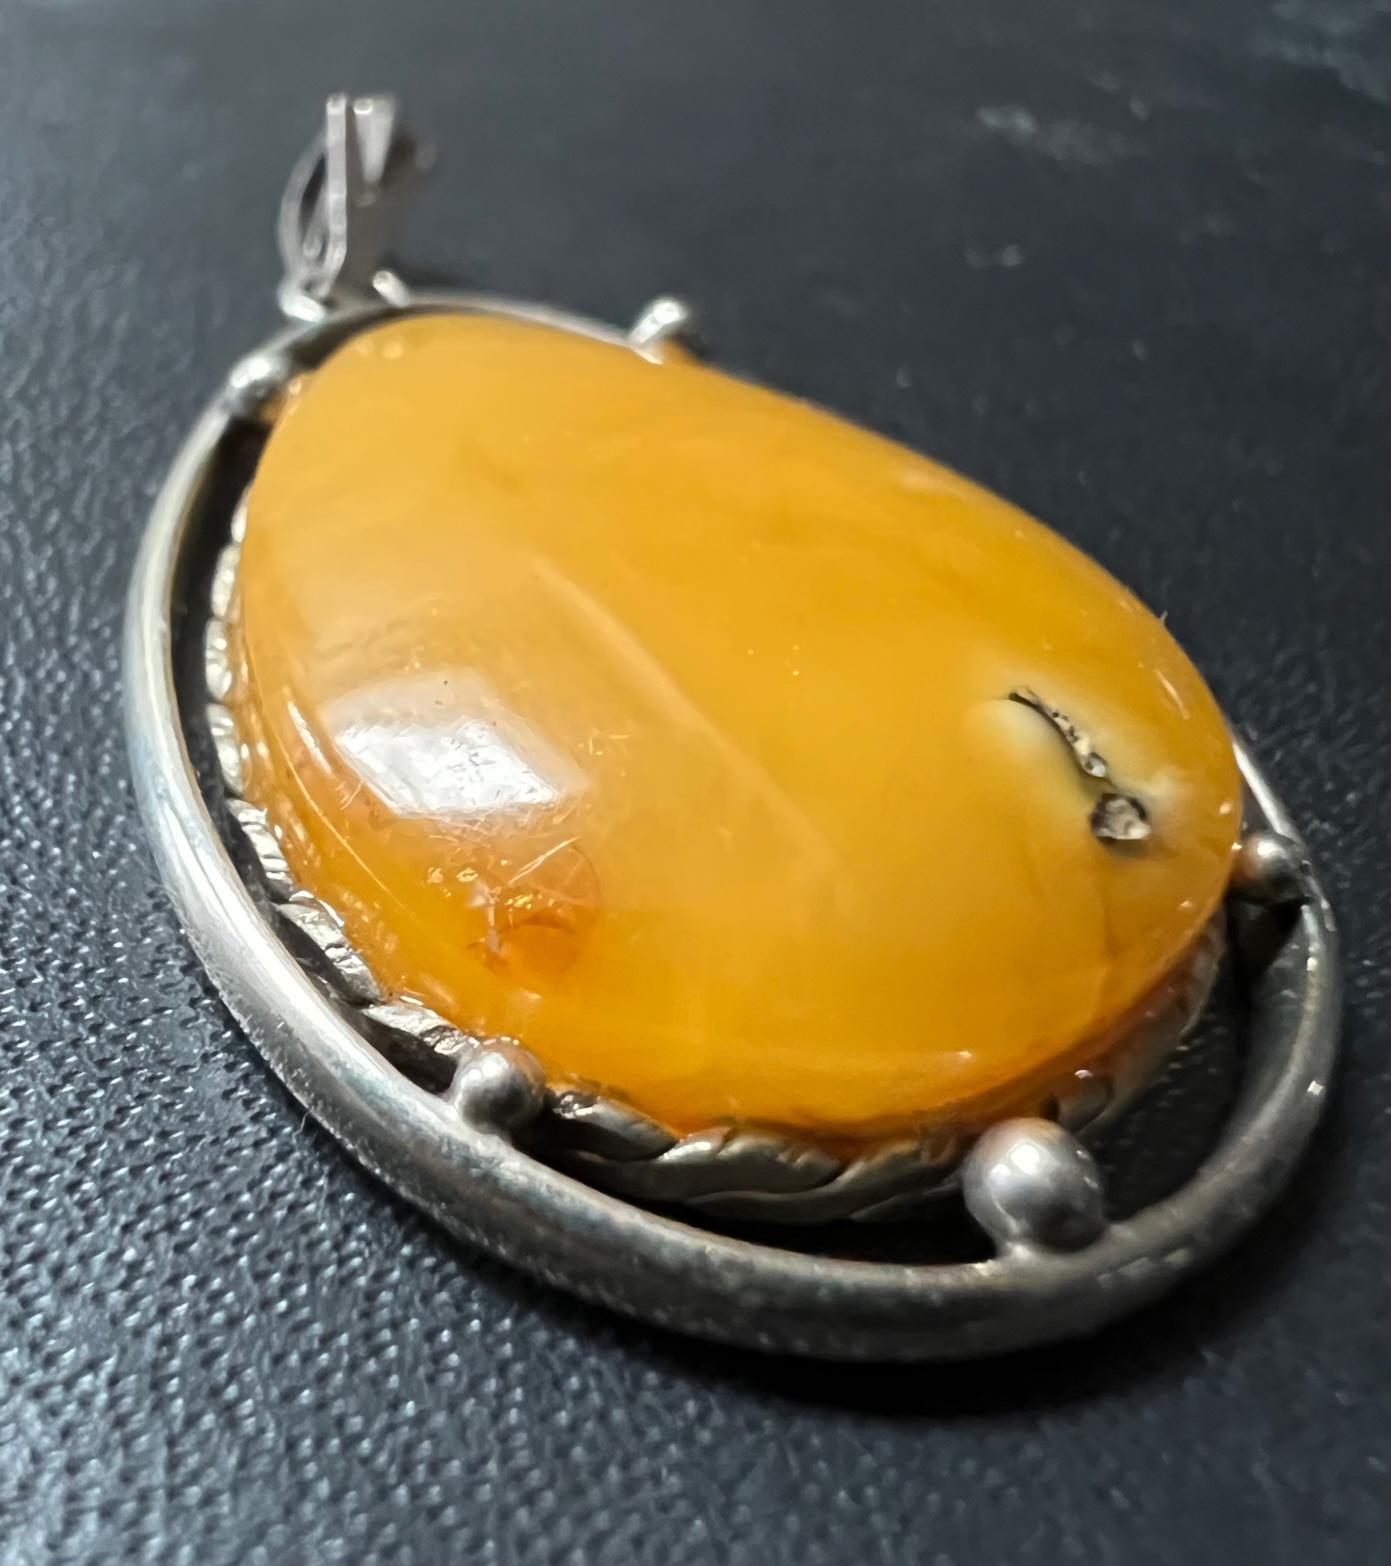 Authentic Baltic Amber Pendant

Baltic amber is 34-48 million years old (Seyfullah et al. 2018), having been deposited during the Lutetian stage of the Middle Eocene. The main deposits of Baltic amber are on the southern shores of the Baltic